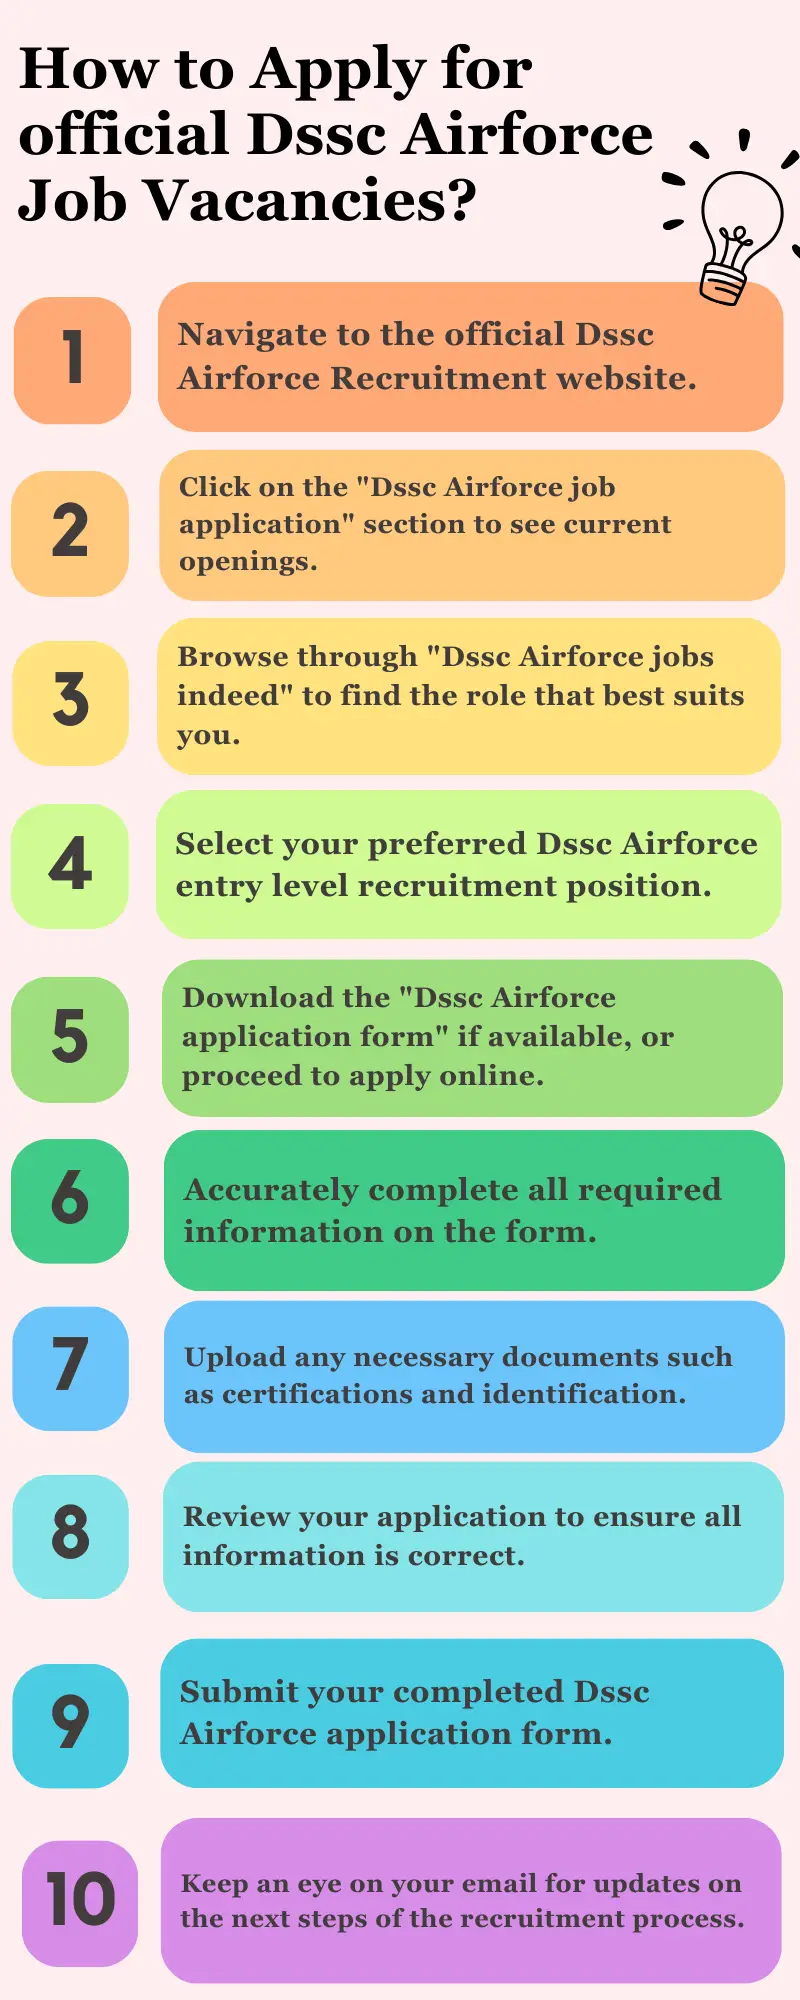 How to Apply for official Dssc Airforce Job Vacancies?